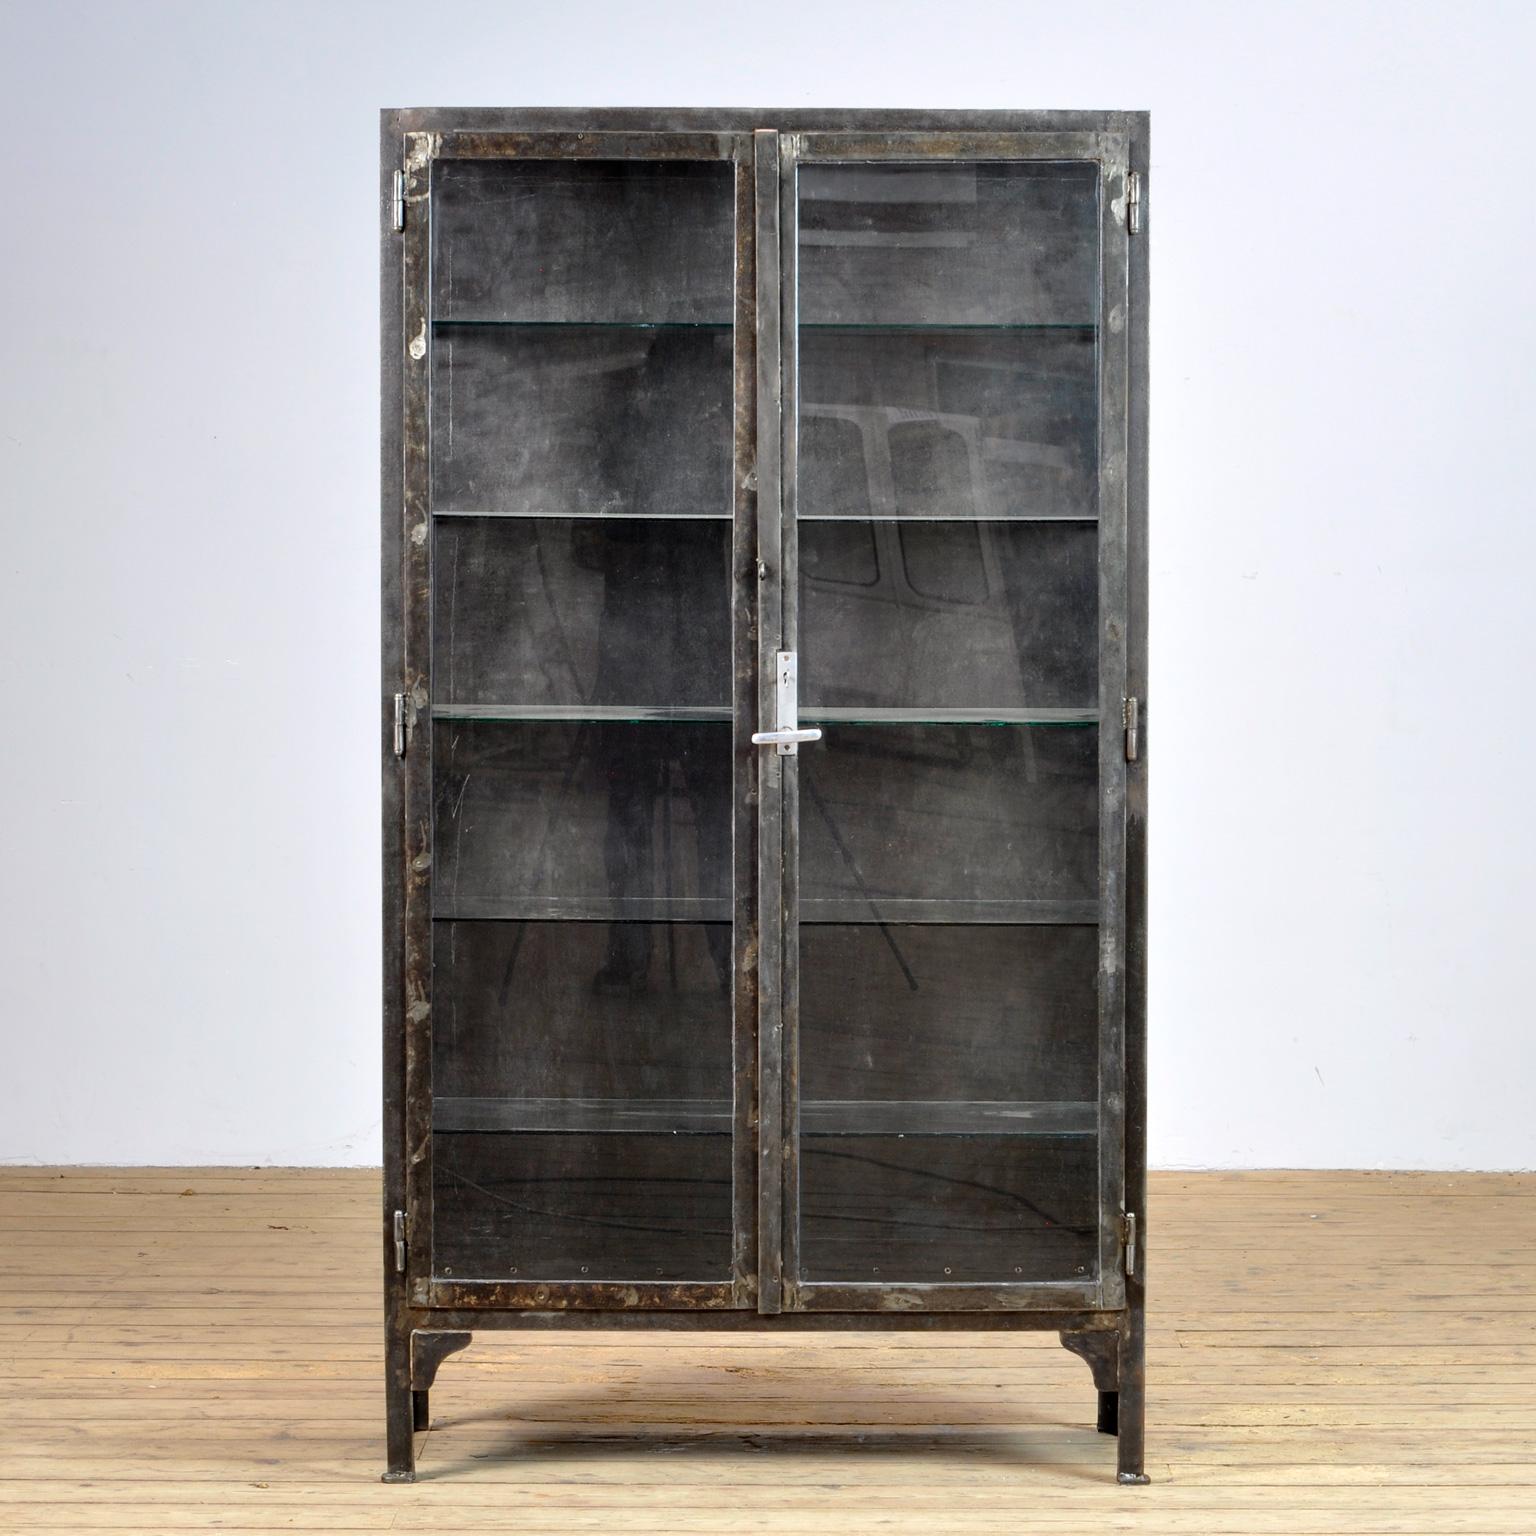 This medical cabinet was produced in the 1930s in Hungary. The cabinet is made from thick iron and glass. The cabinet has been stripped from its paint, polished and treated for rust. It features five glass shelves. Heavy quality.